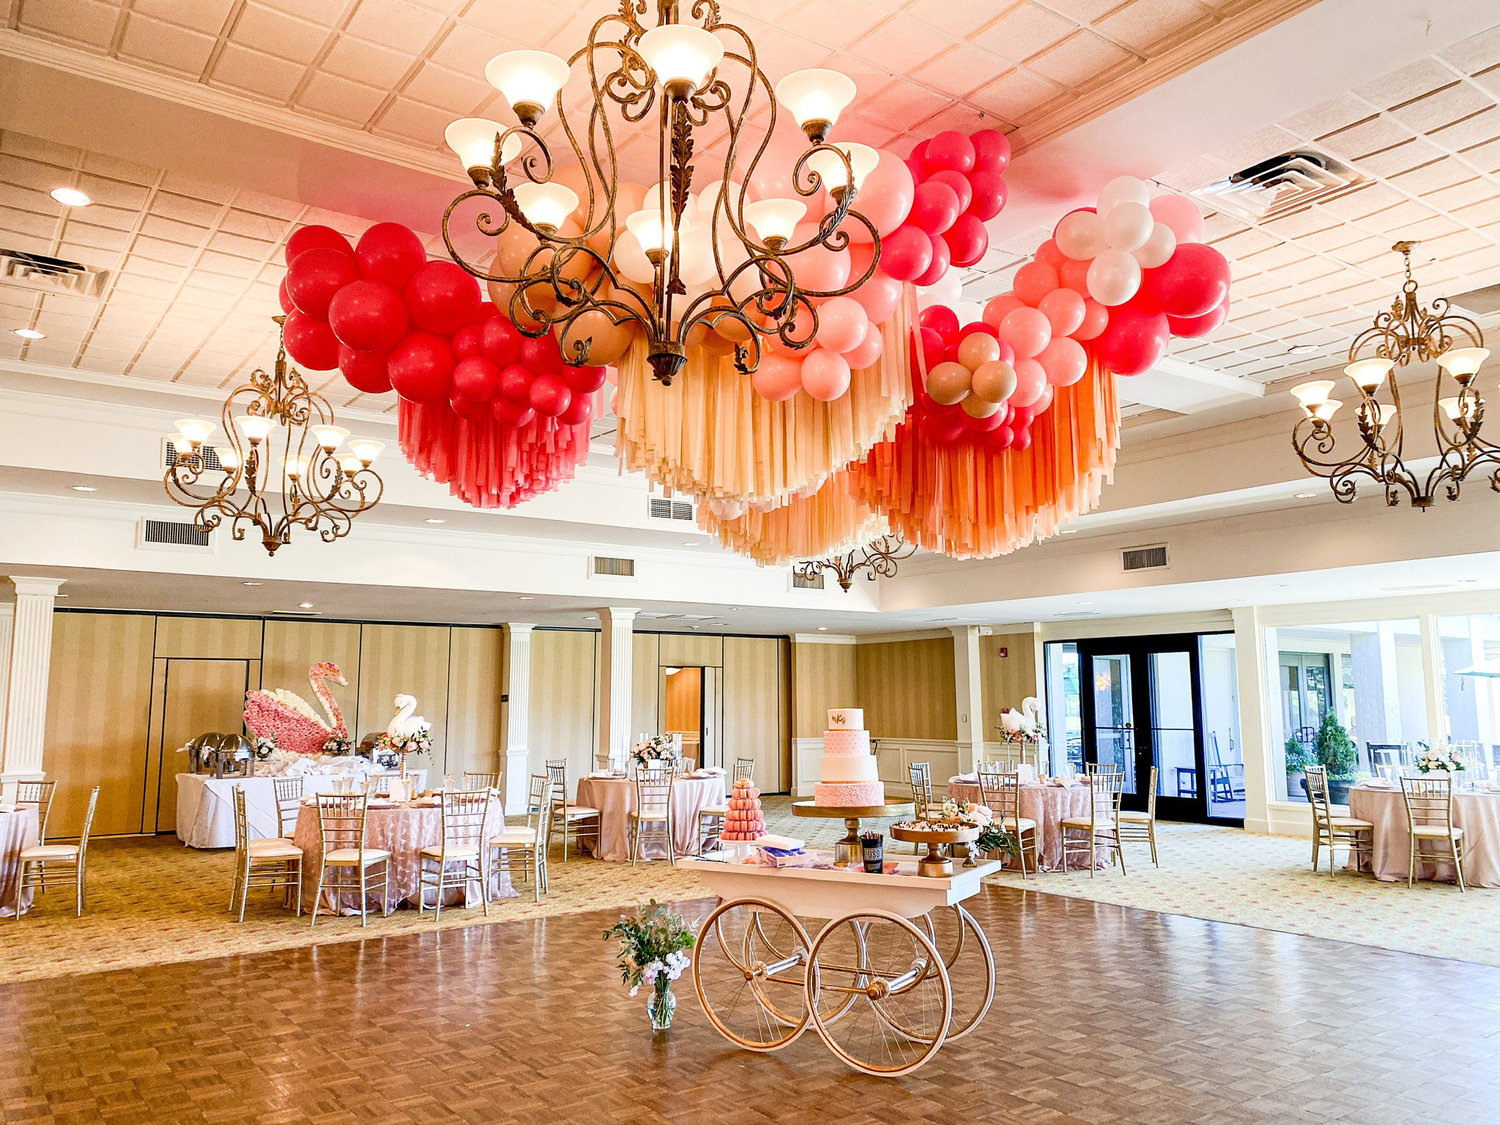 Meraki Creative designed the balloon decorations for this baby shower. Contributed photo